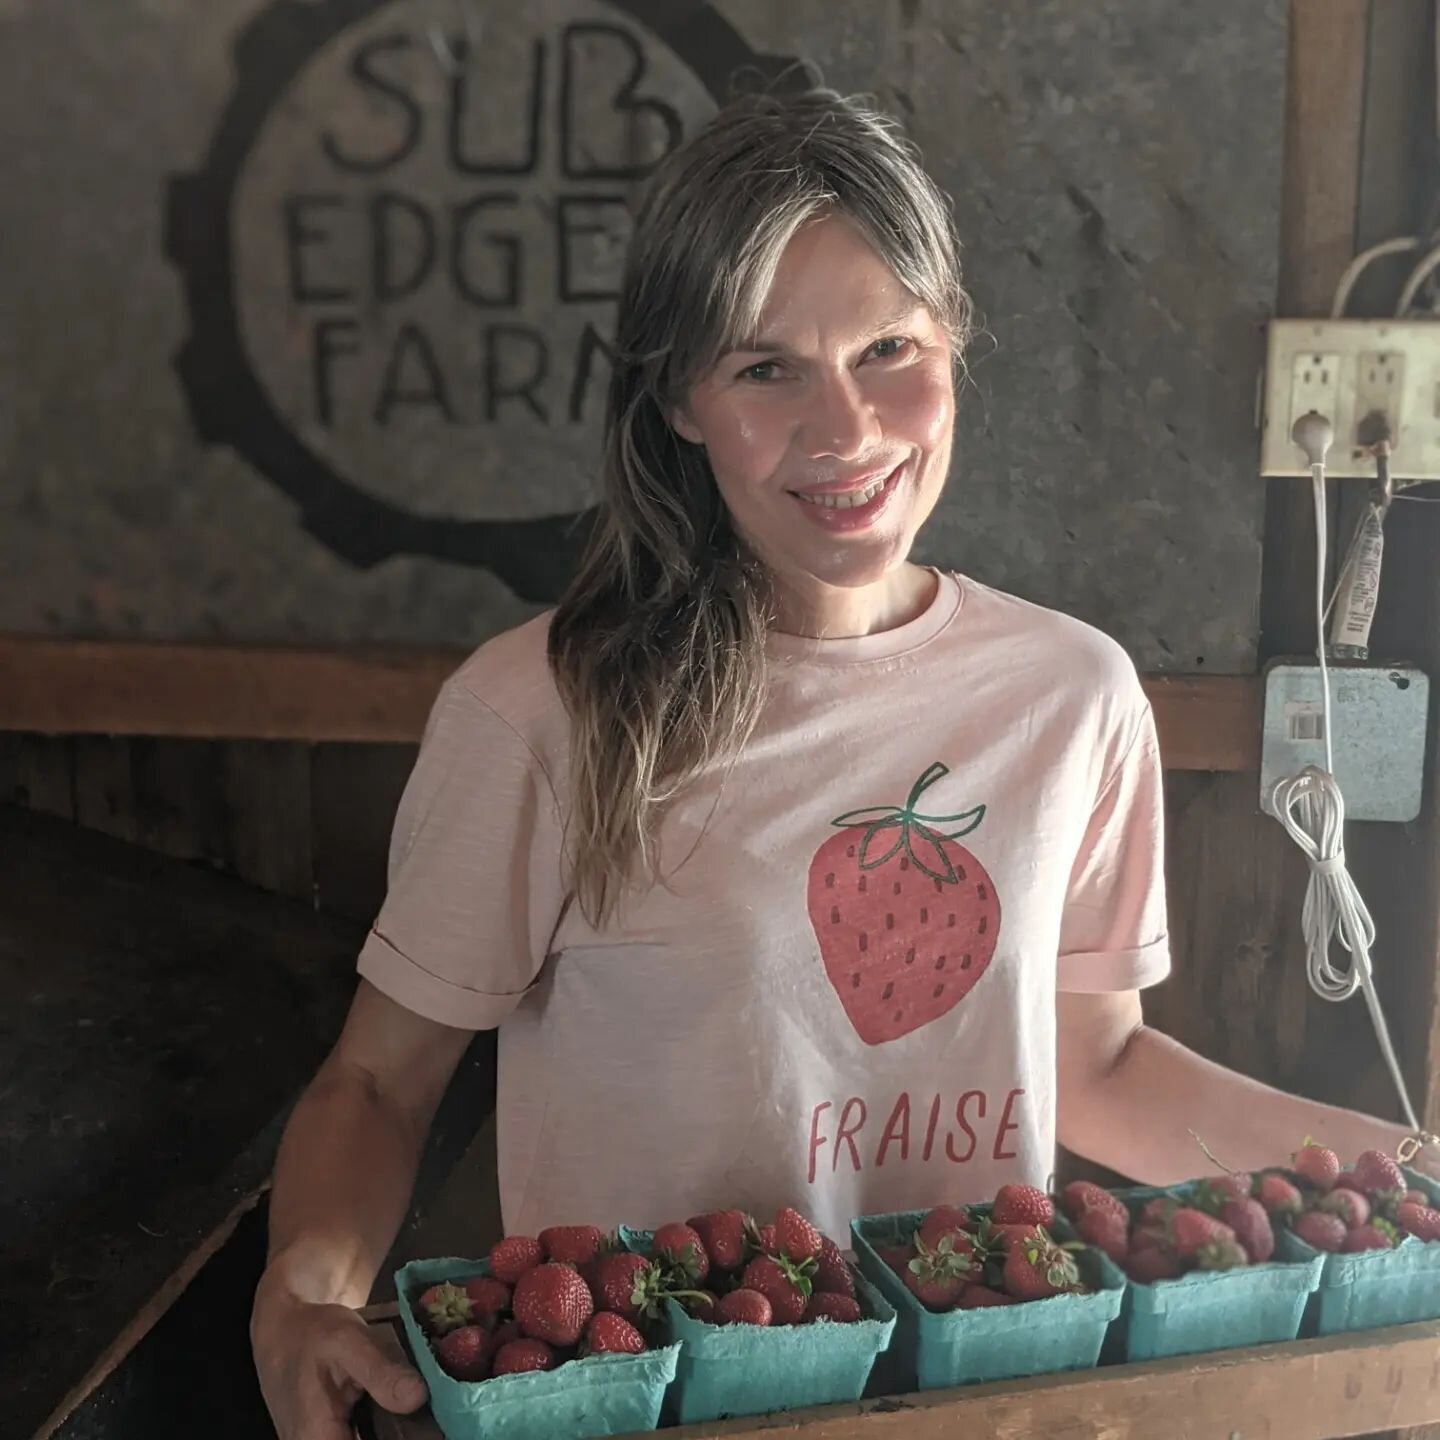 It's officially strawberry season at Sub Edge Farm. Stop by for some today! 🍓🍓🍓